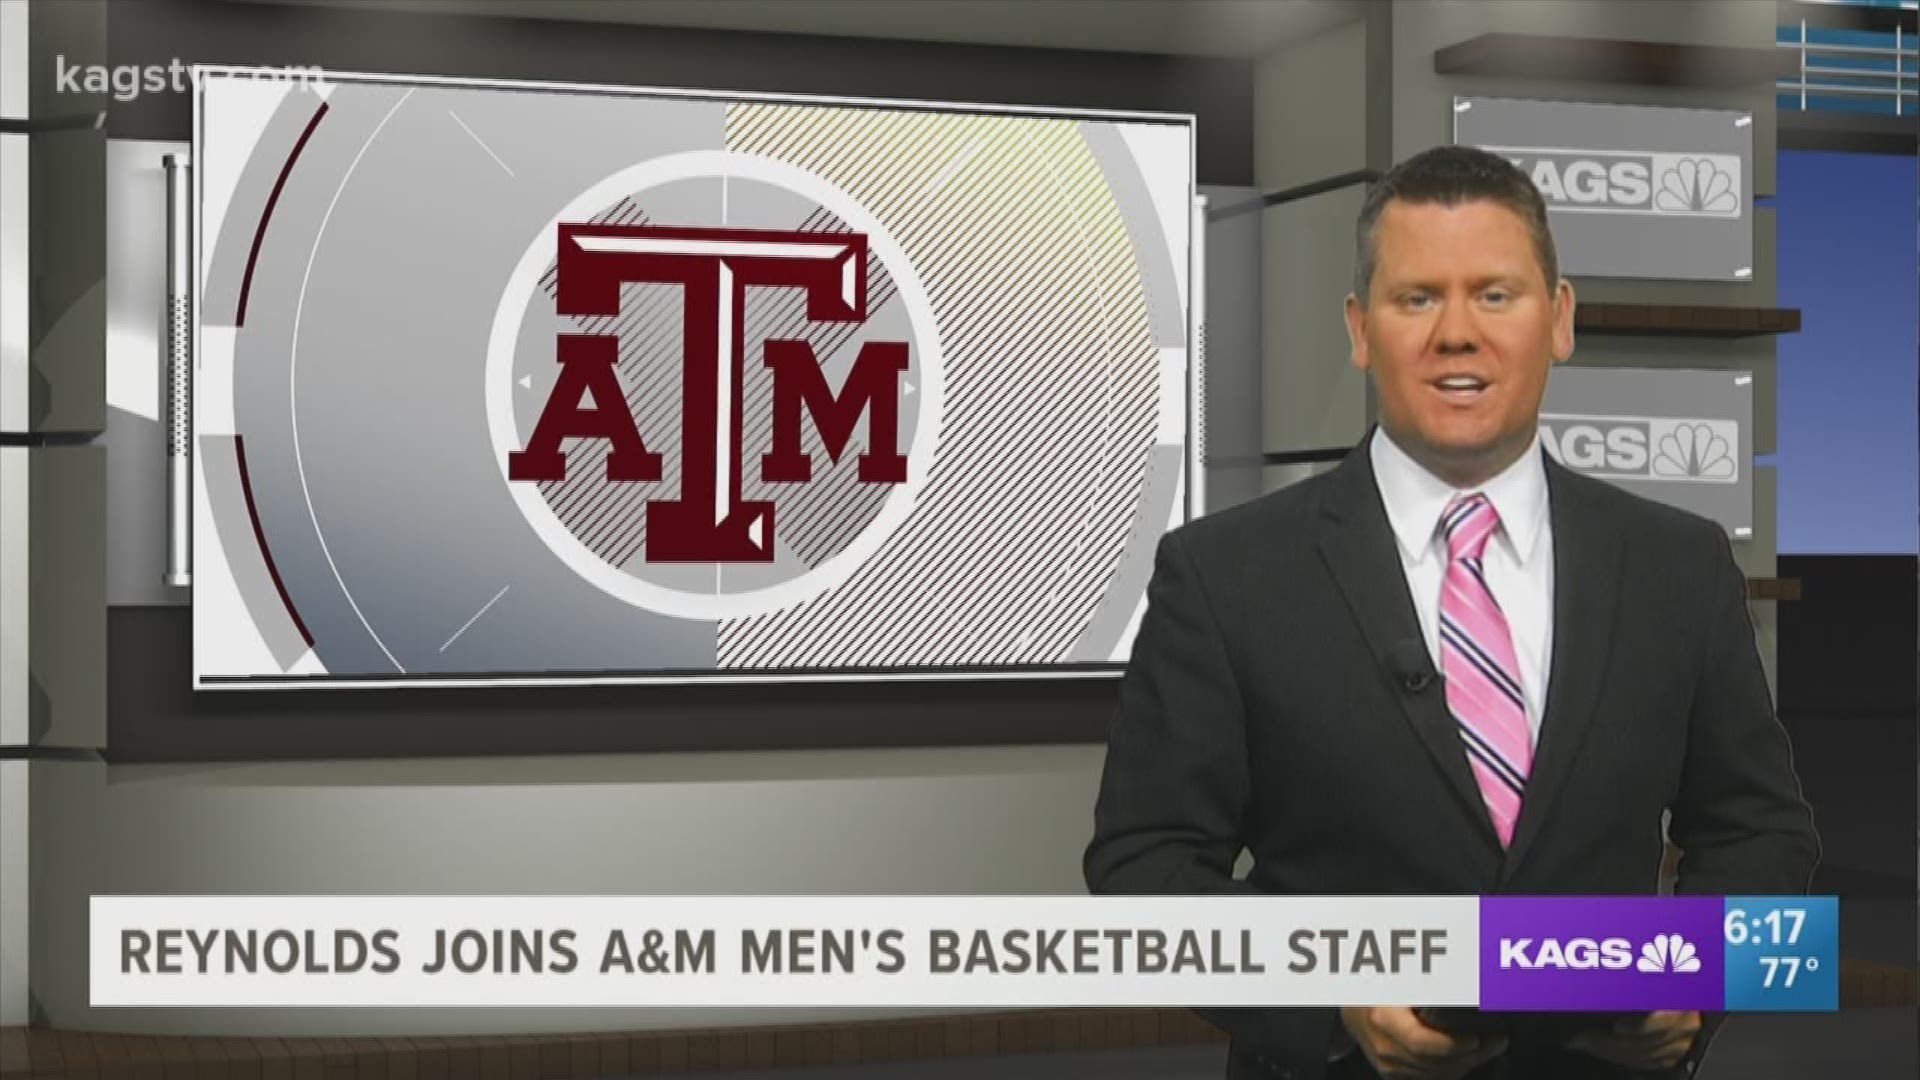 Bringing an impressive coaching background that spans nearly 40 years and includes three head coaching stints, Jeff Reynolds is set to join the Texas A&M men's basketball staff as an assistant coach.